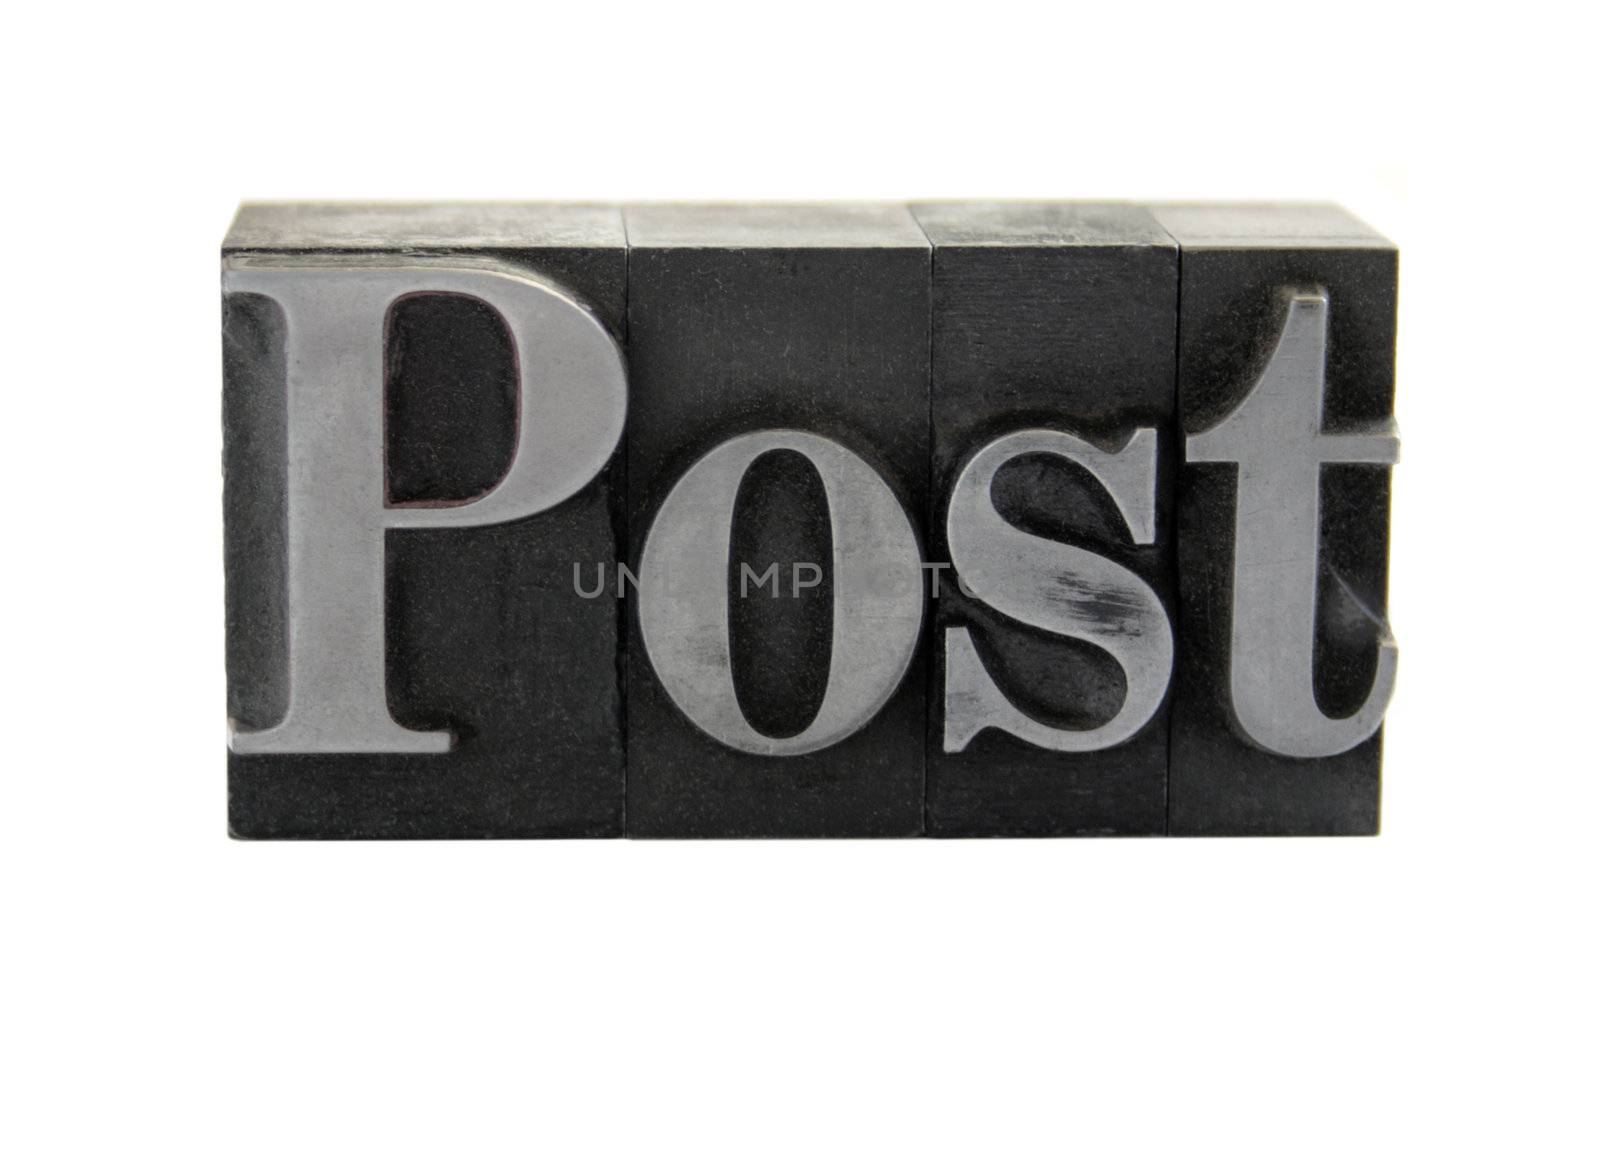 old, ink-stained metal letterpress type spells out the word 'Post' isolated on white